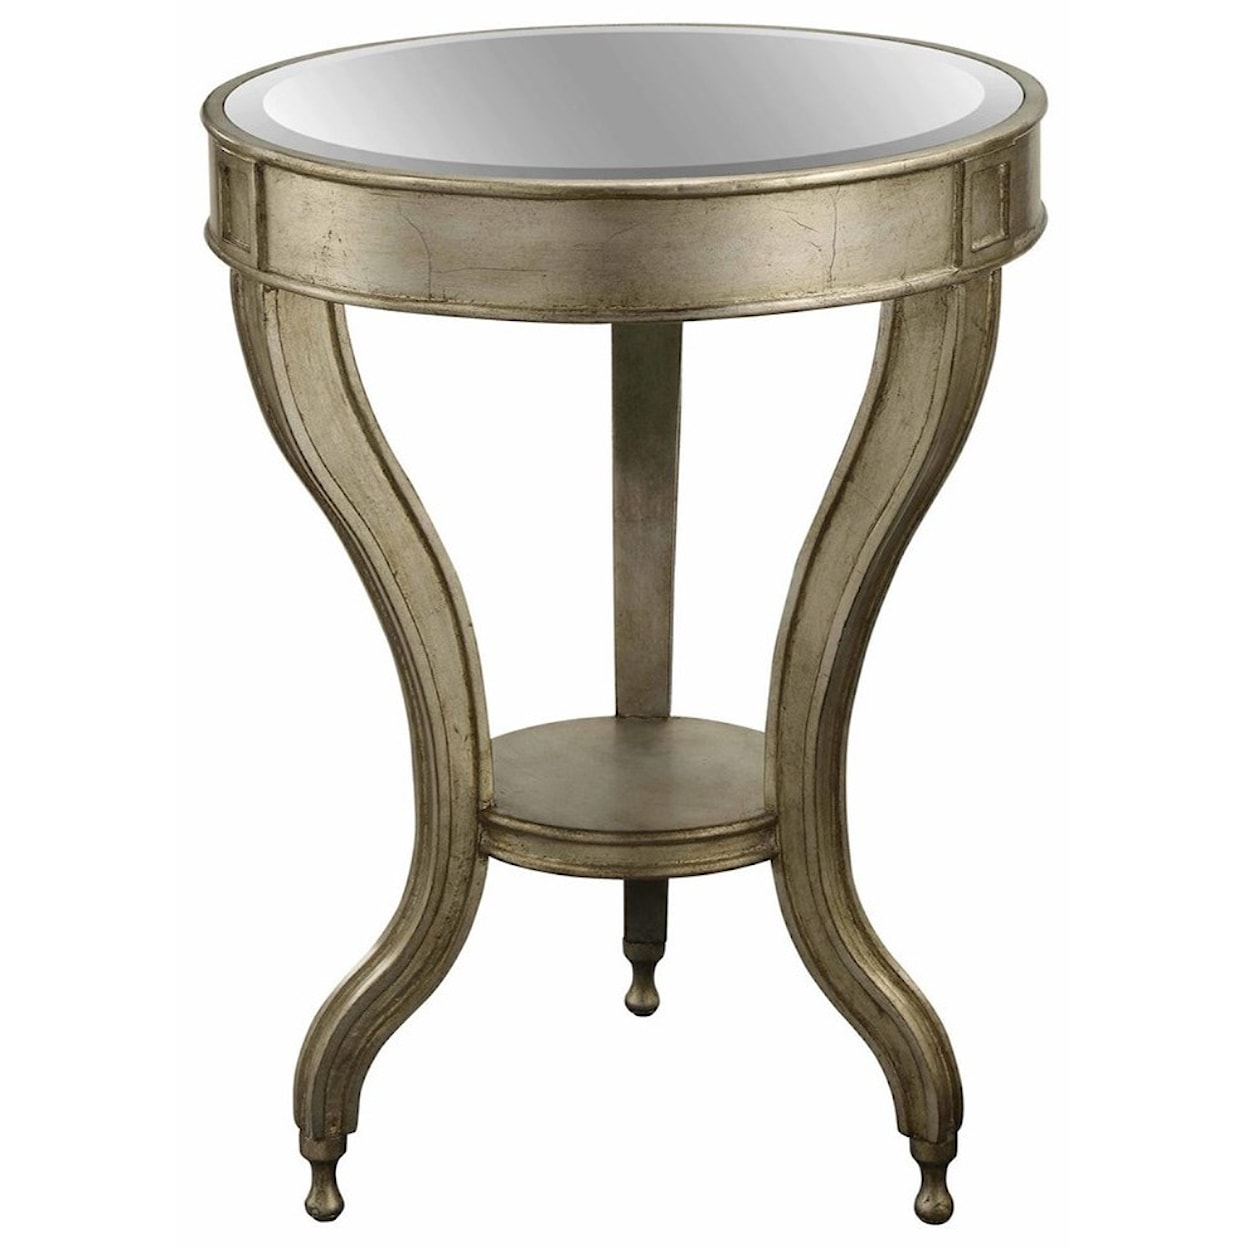 Crestview Collection Accent Furniture Beverly Gold Leaf Mirrored Accent Table